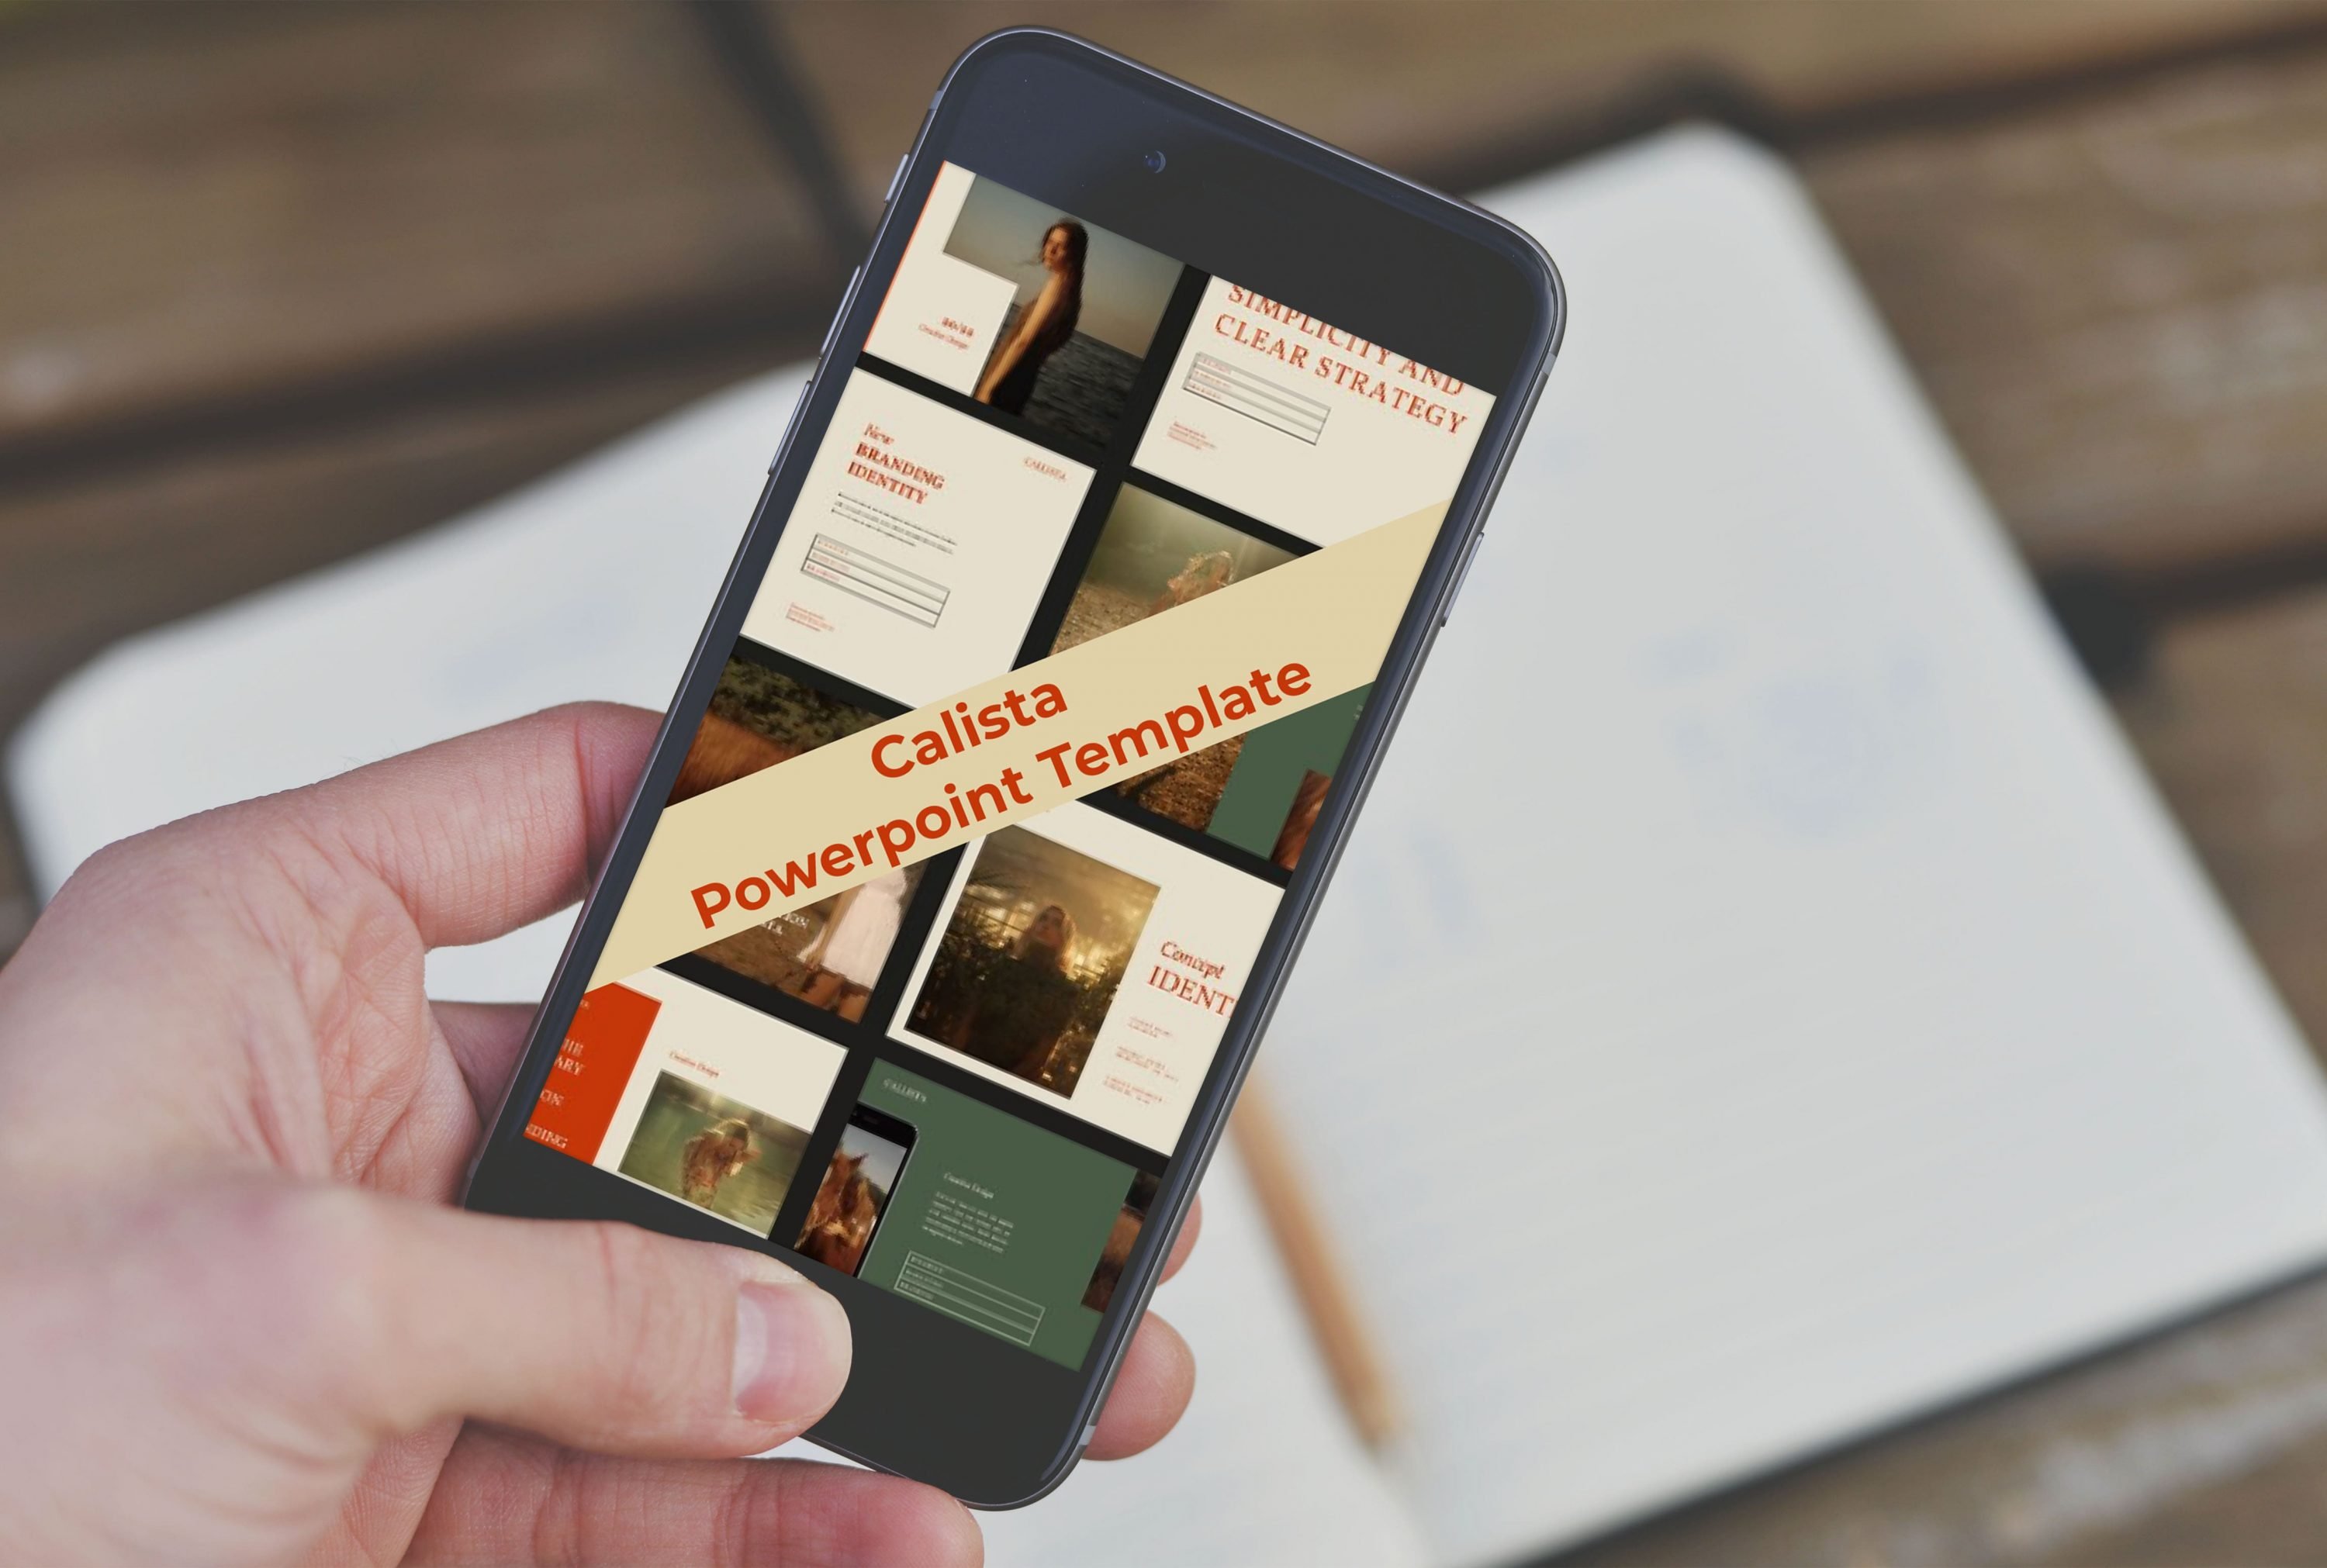 Mobile option of the Calista Powerpoint Template.